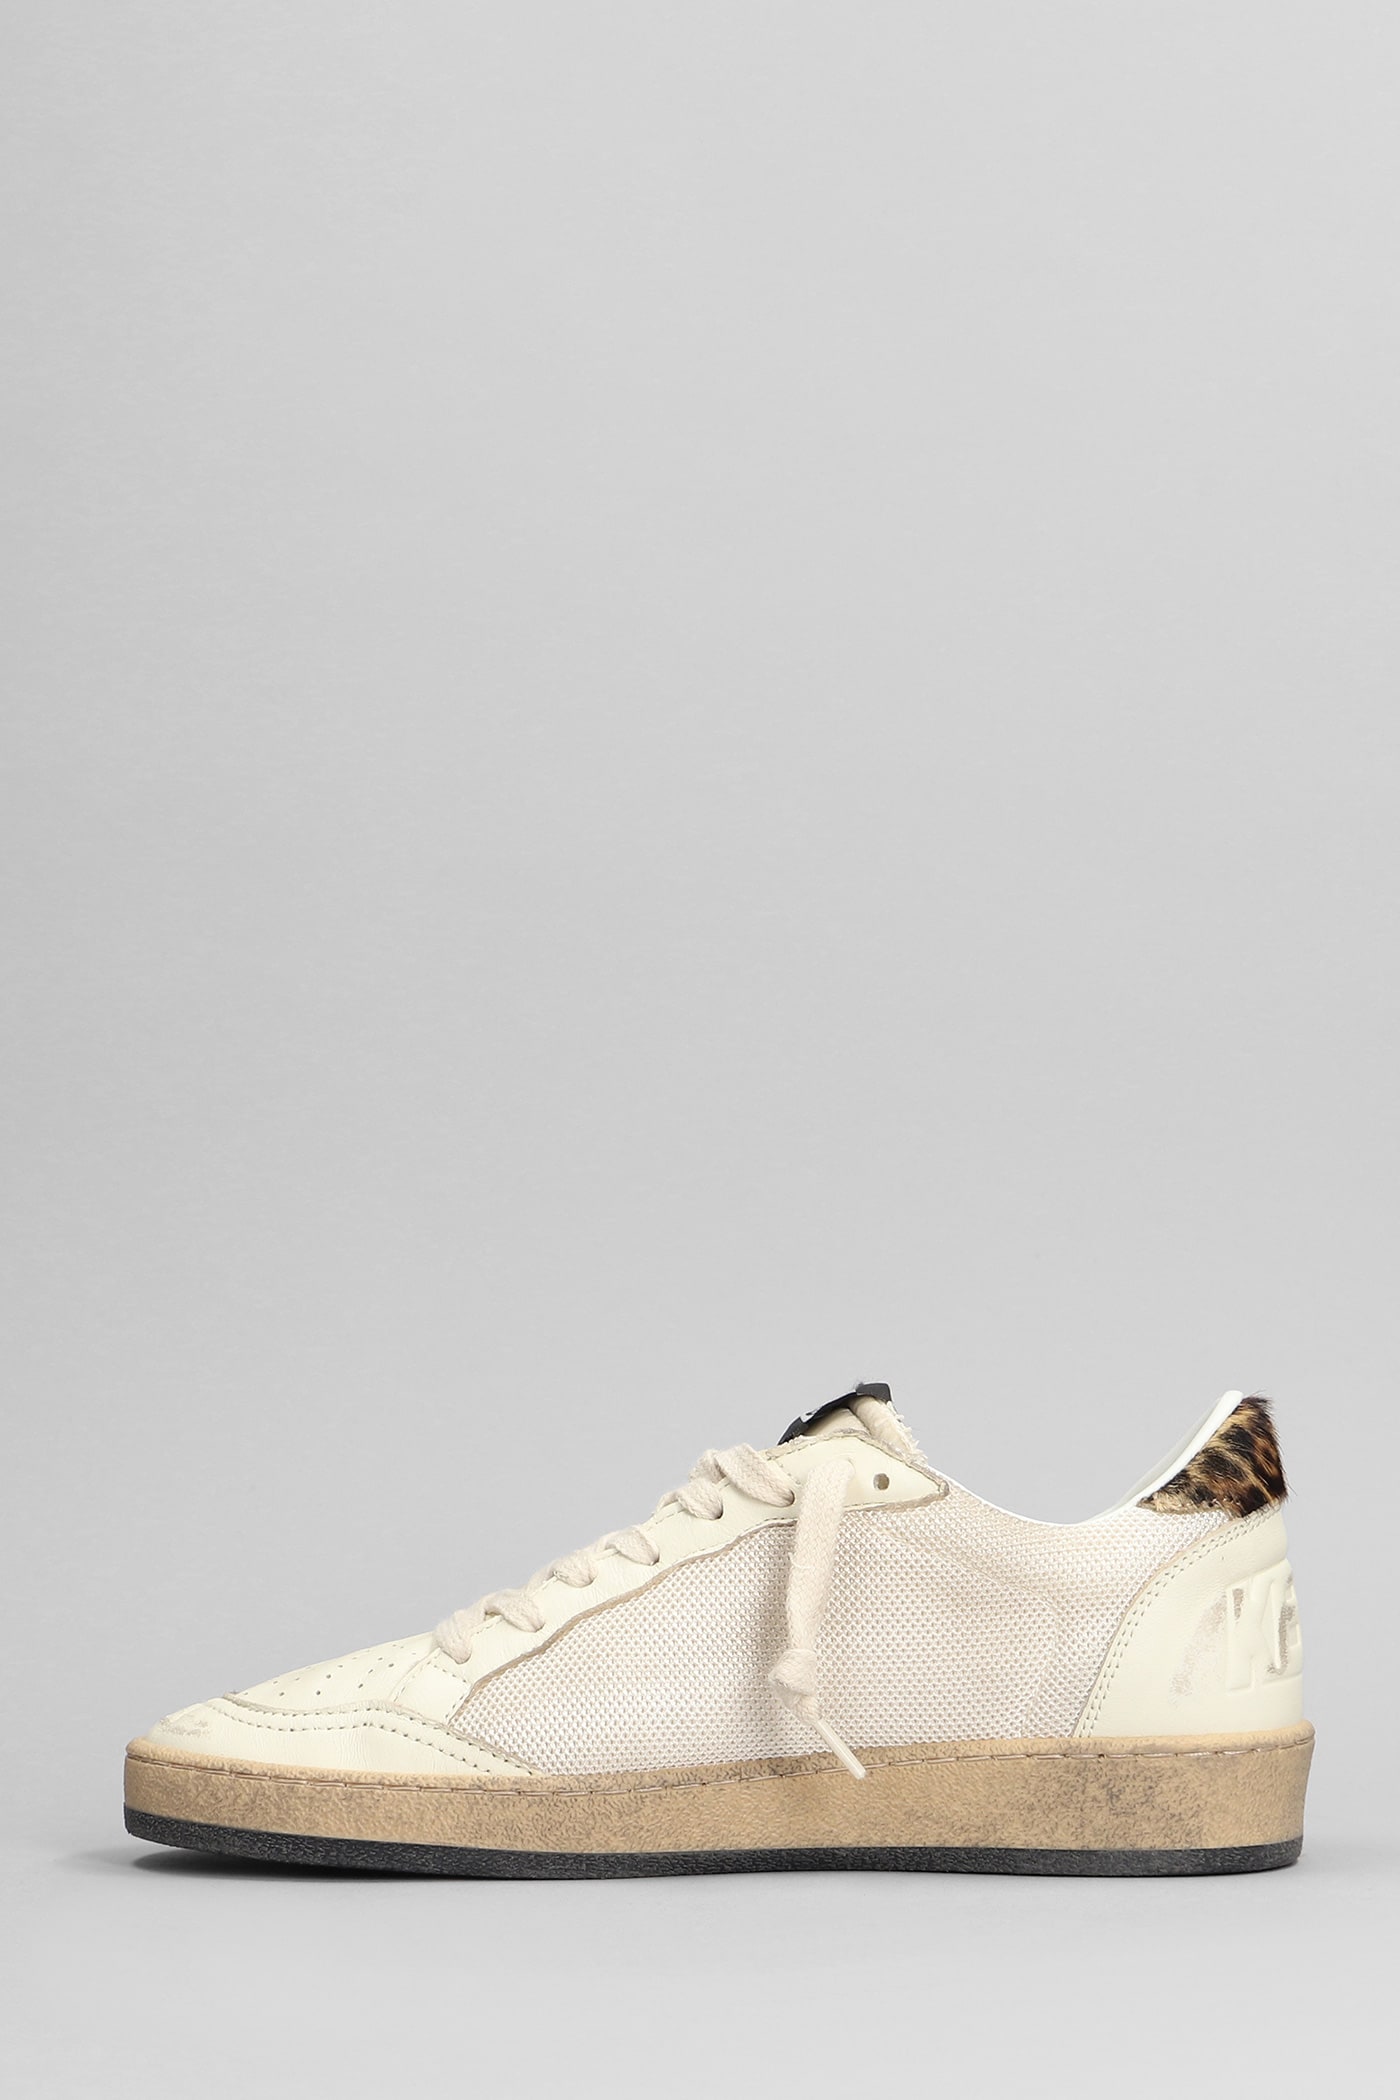 Shop Golden Goose Ball Star Sneakers In Beige Leather And Fabric